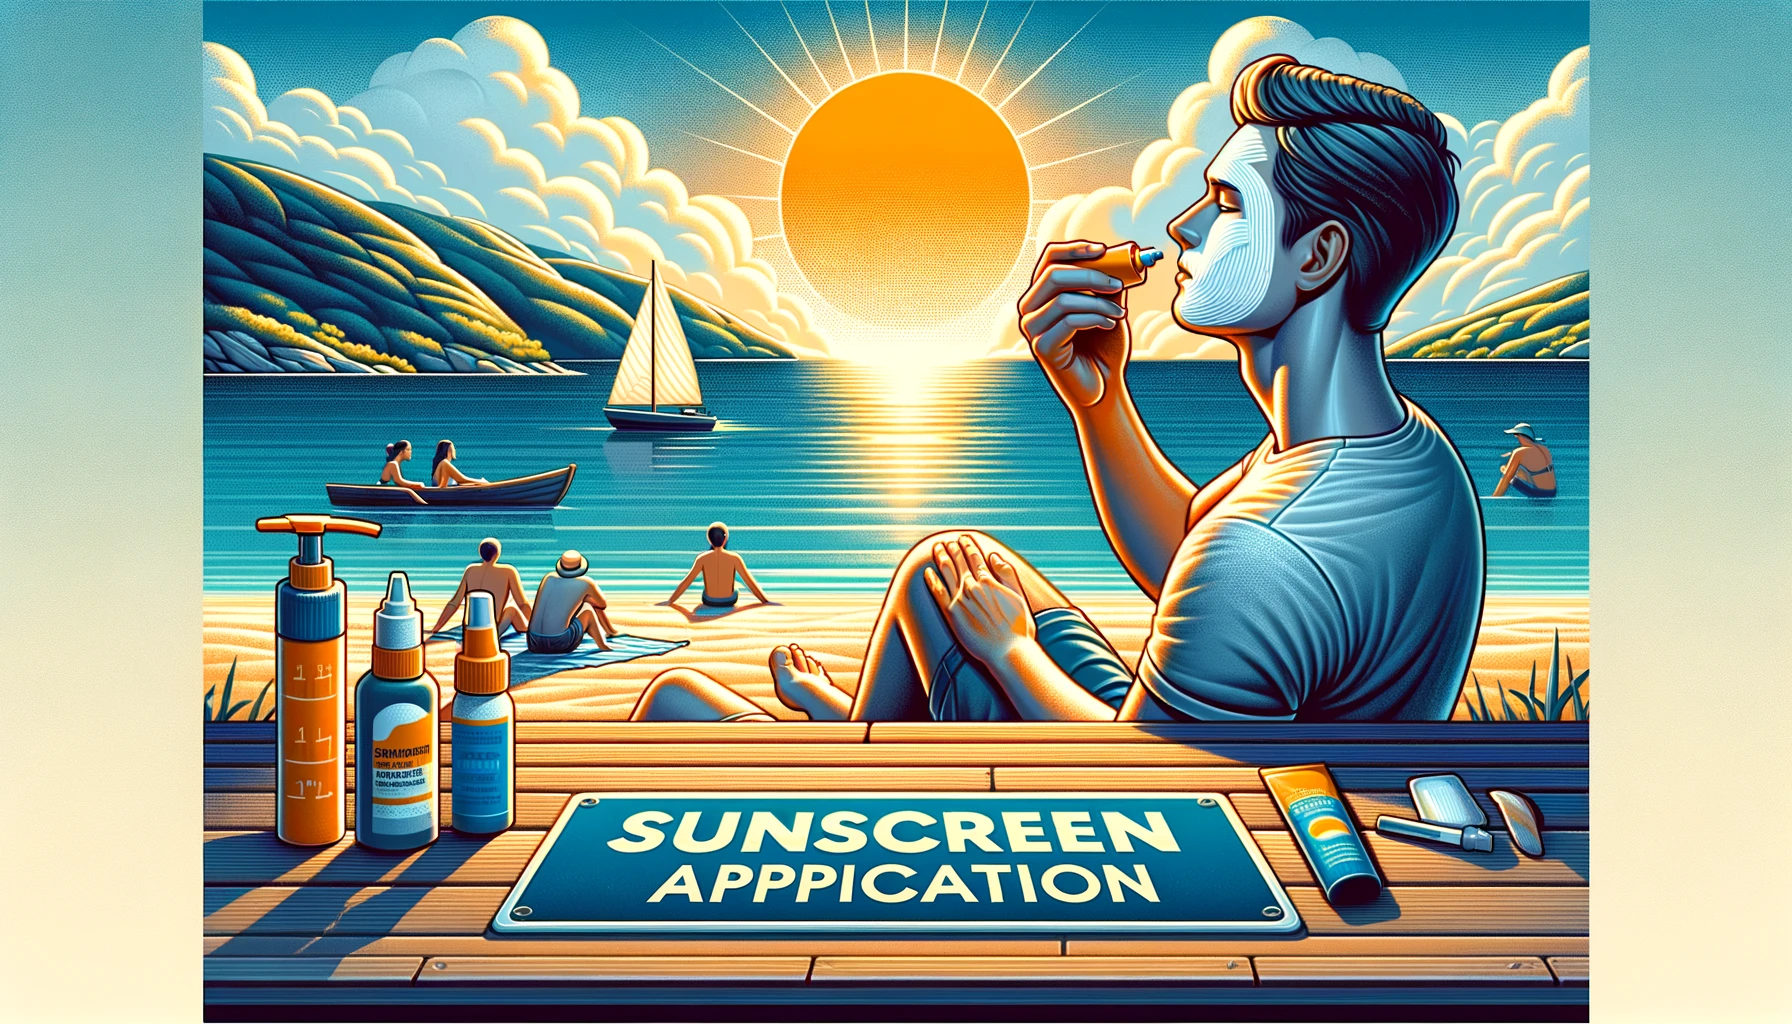 Image illustrating Sunscreen Application effects face tanning